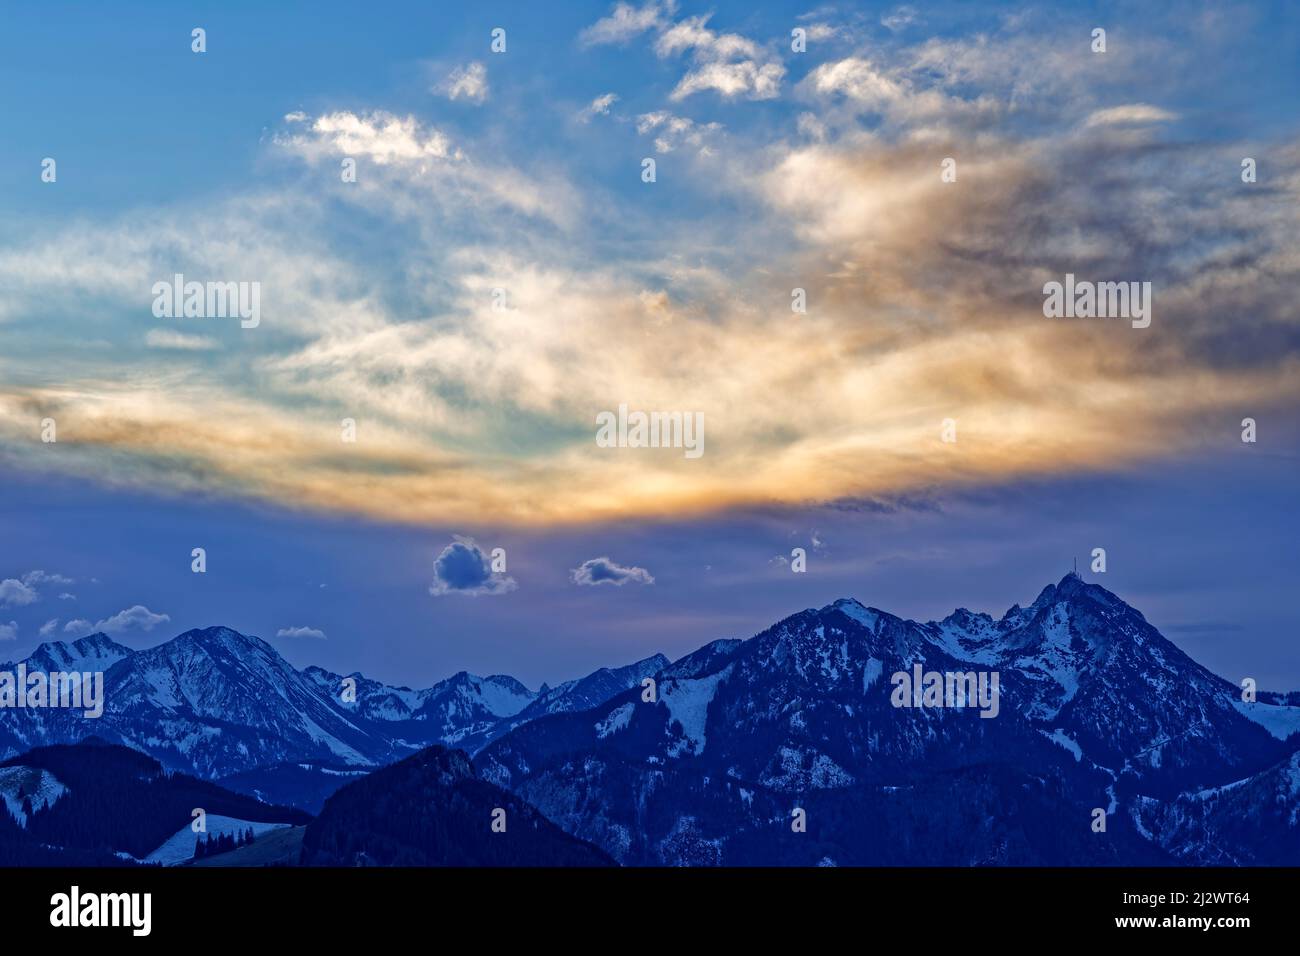 Evening cloud mood over the Spitzing area and Wendelstein, from the Heuberg, Chiemgau Alps, Upper Bavaria, Bavaria, Germany Stock Photo